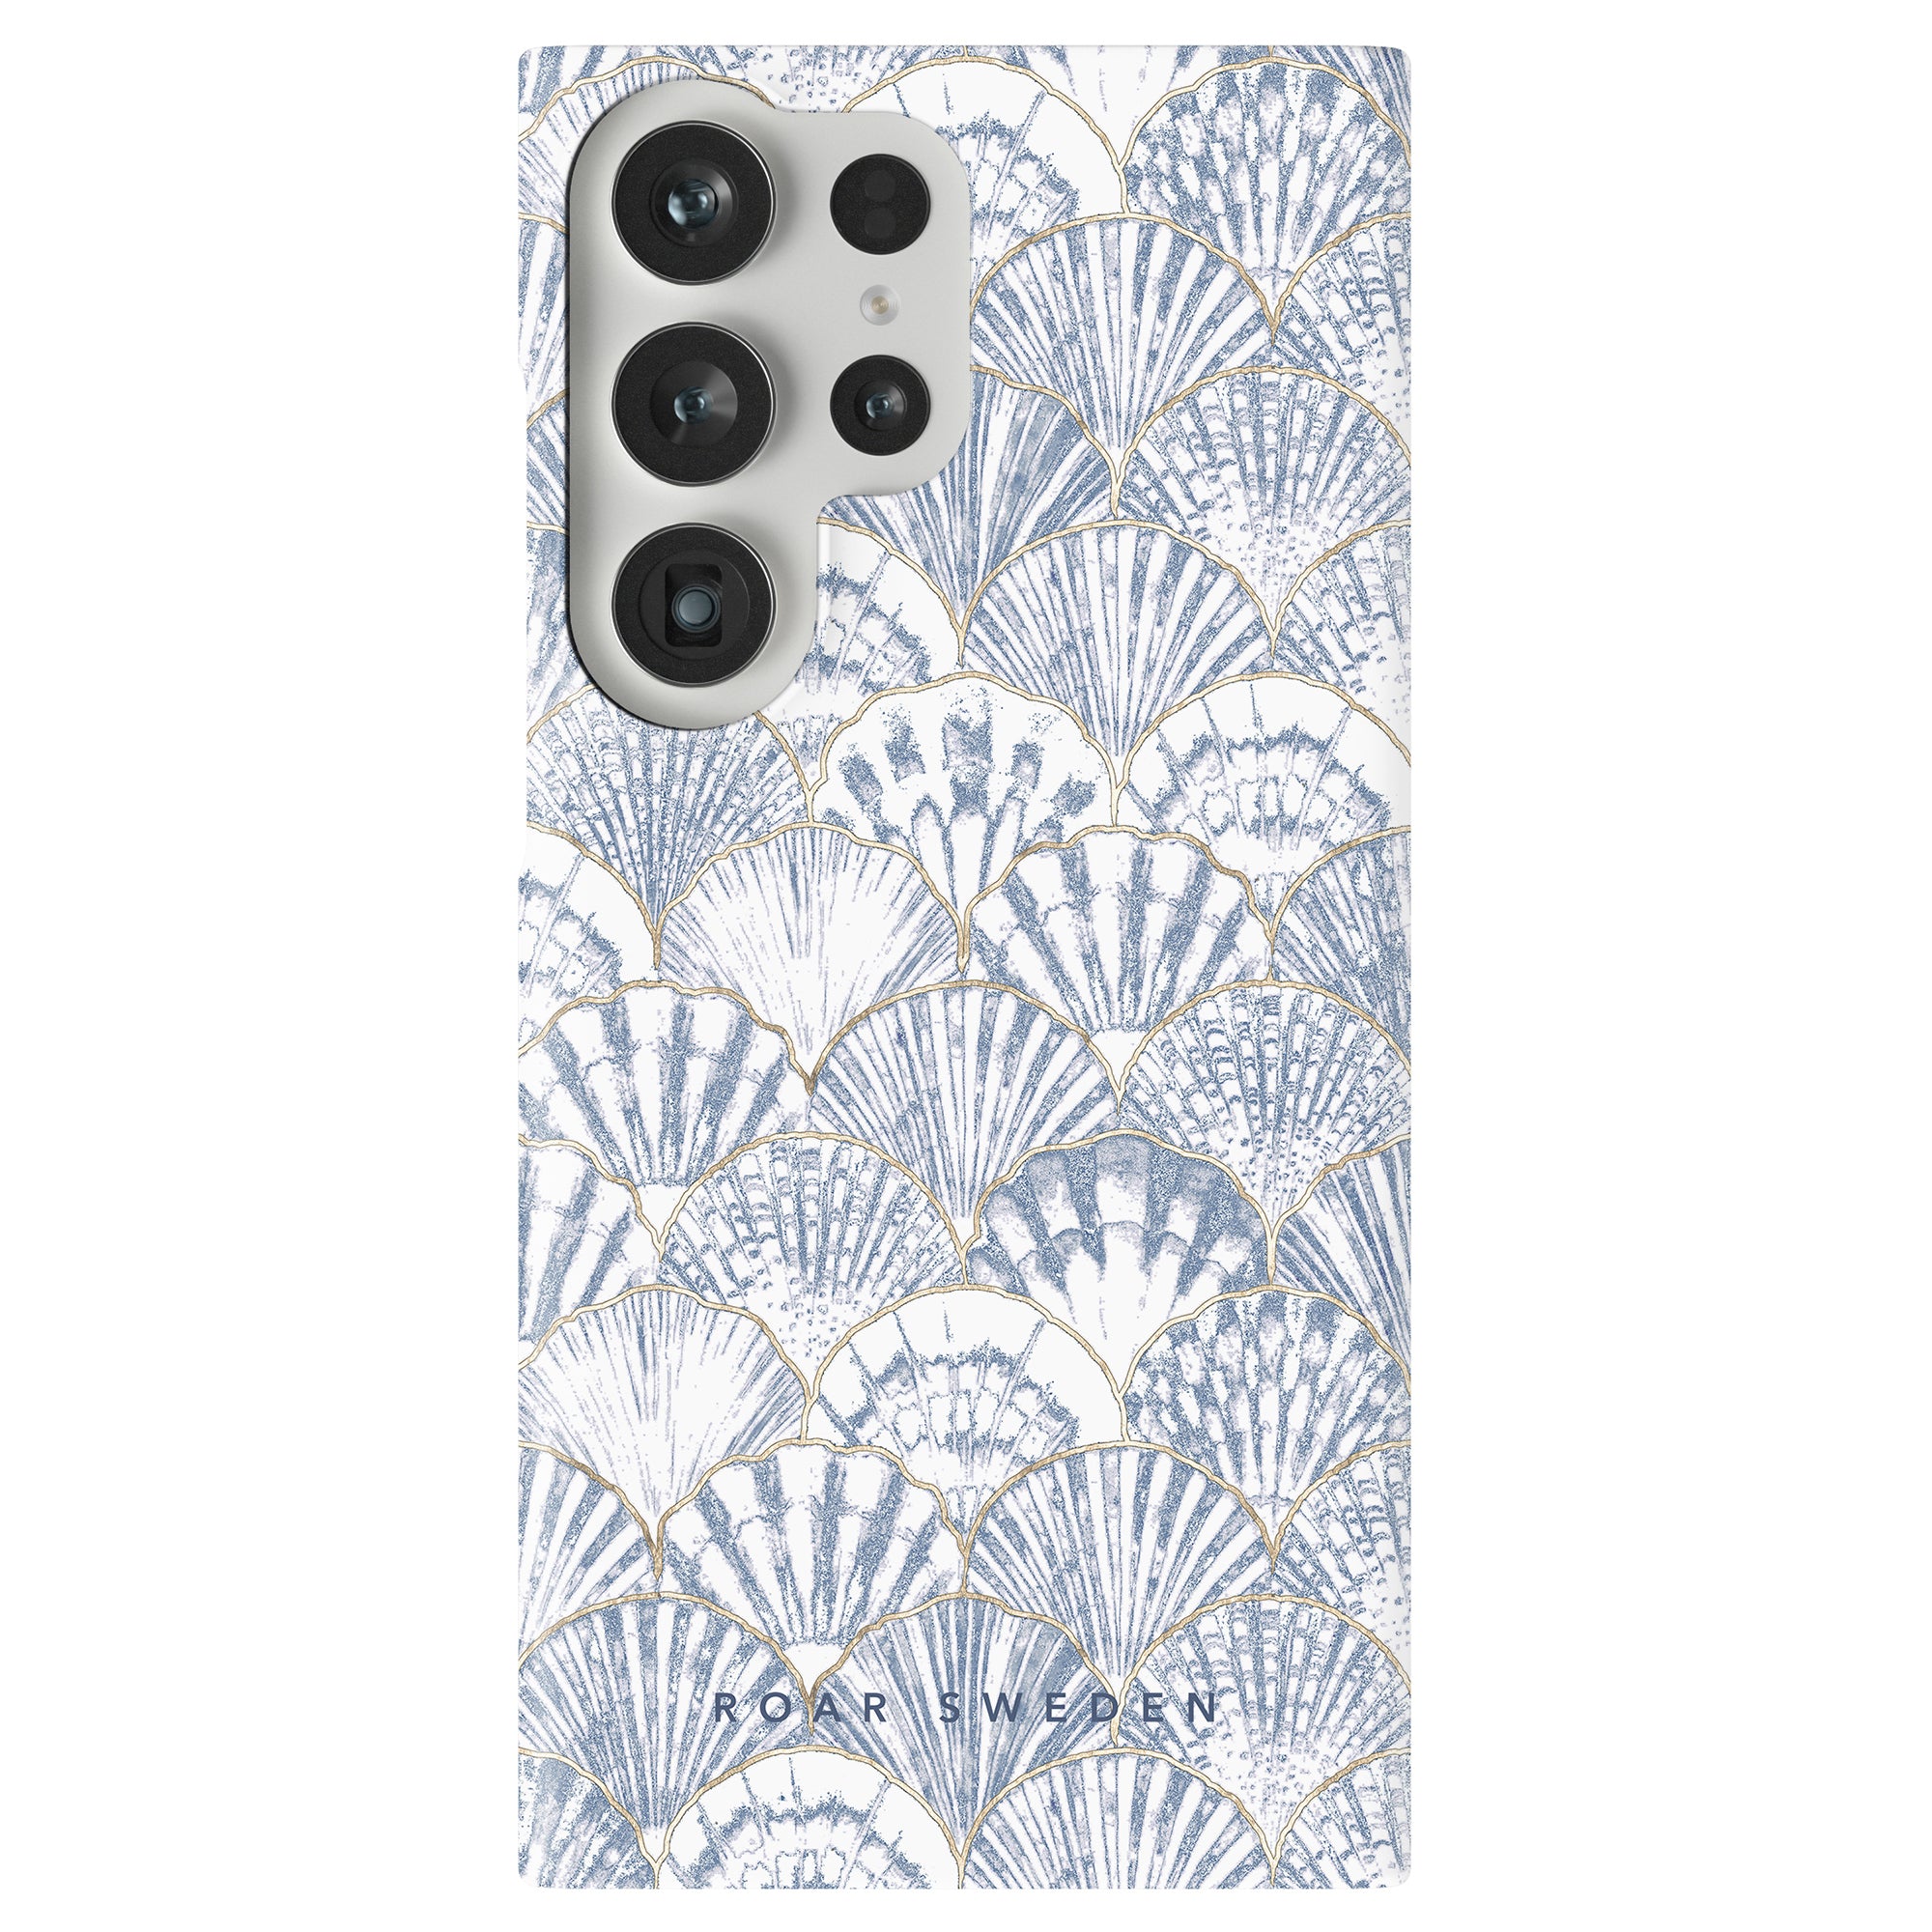 A smartphone with a Valencia - Slim case from the ocean collection and a triple camera setup.